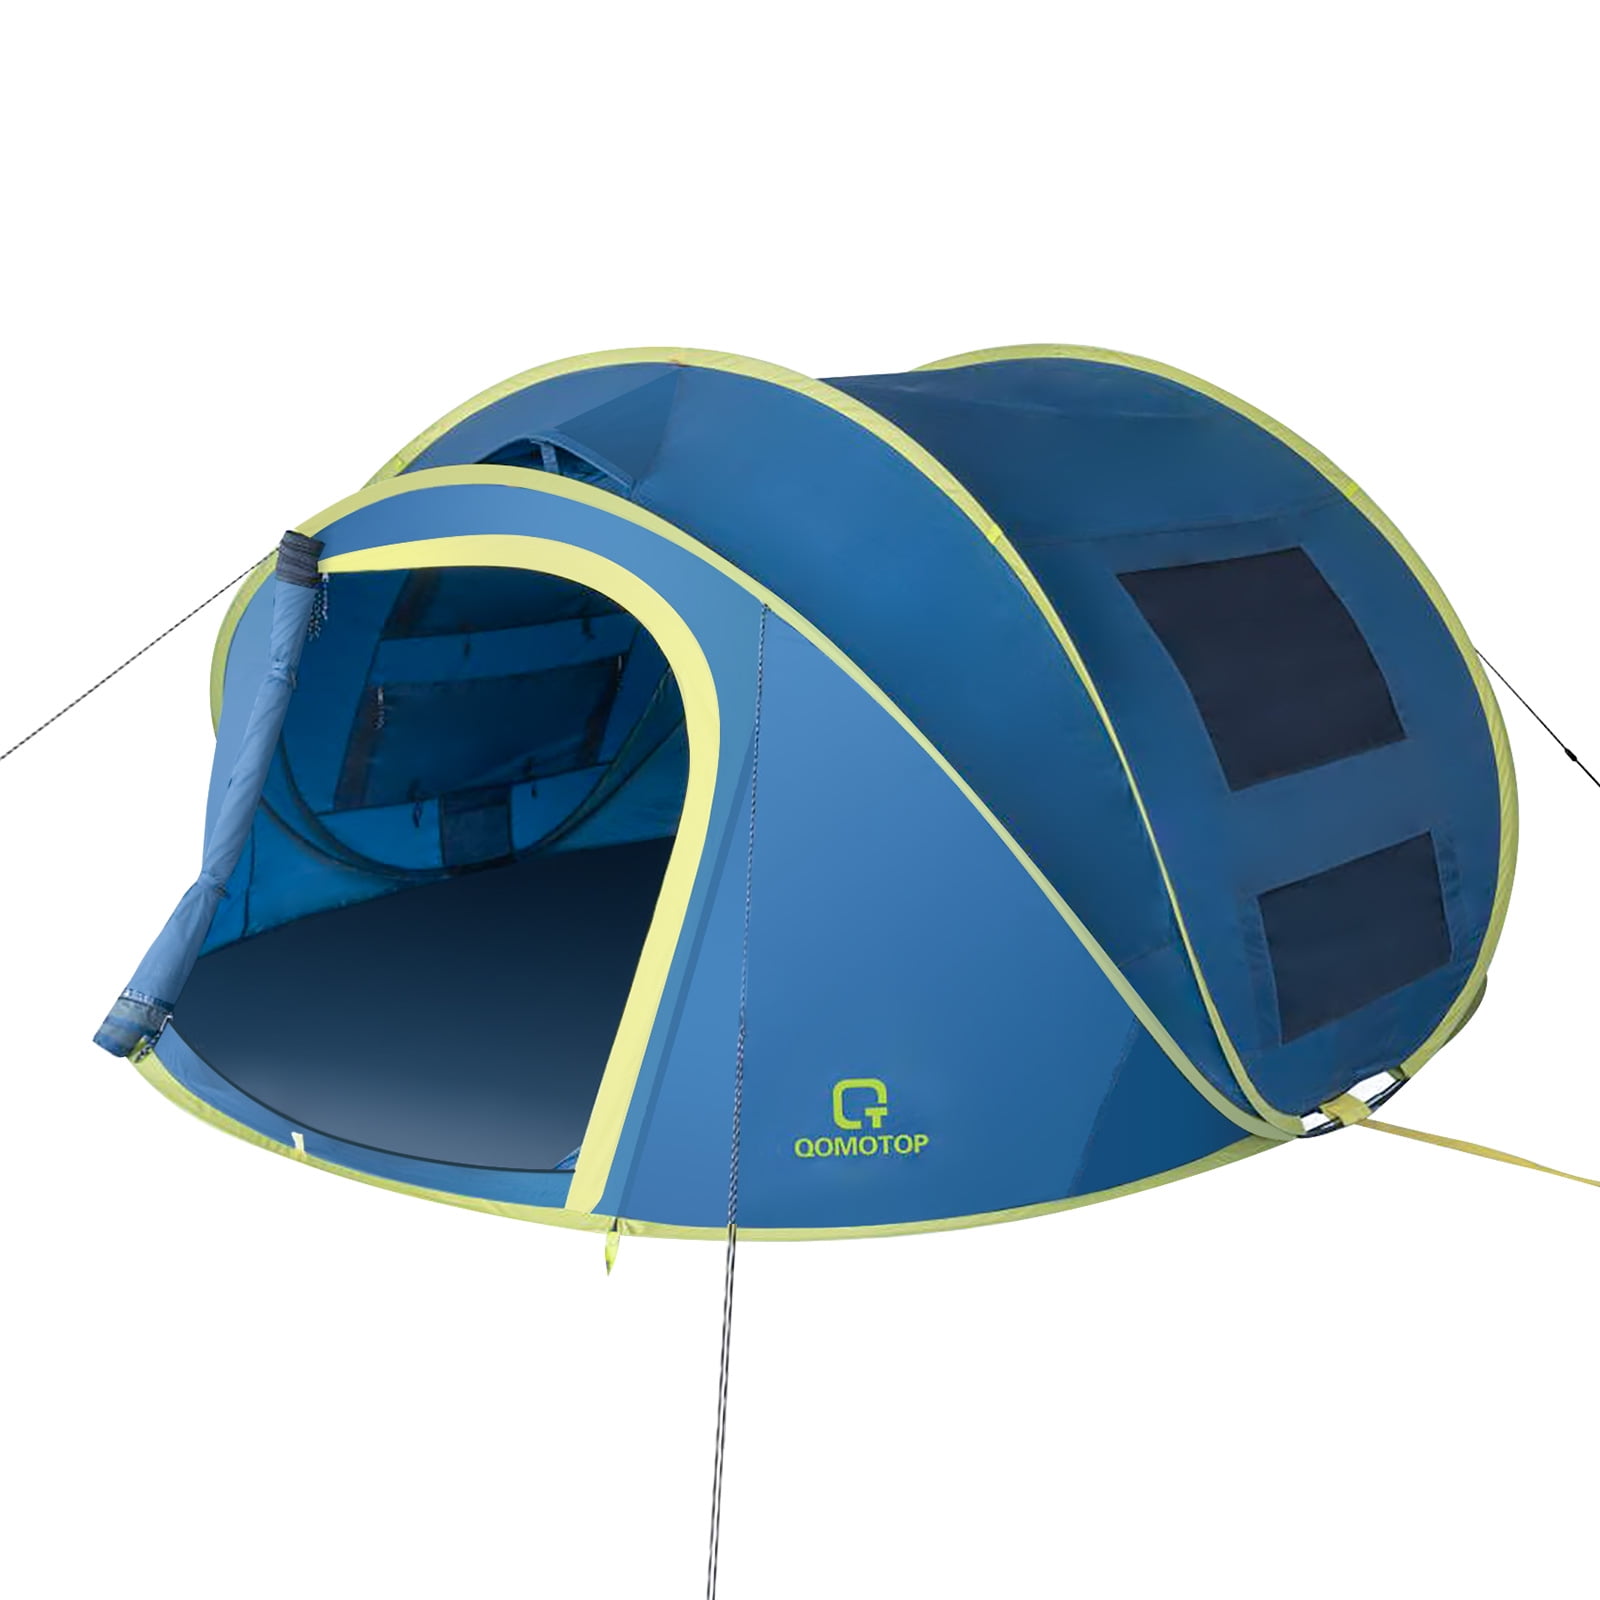 QOMOTOP Instant Tent 4-Person Camp Tent, Automatic Setup Pop Up Tent, Waterproof, Huge Side Screen Windows, Blue - image 1 of 8